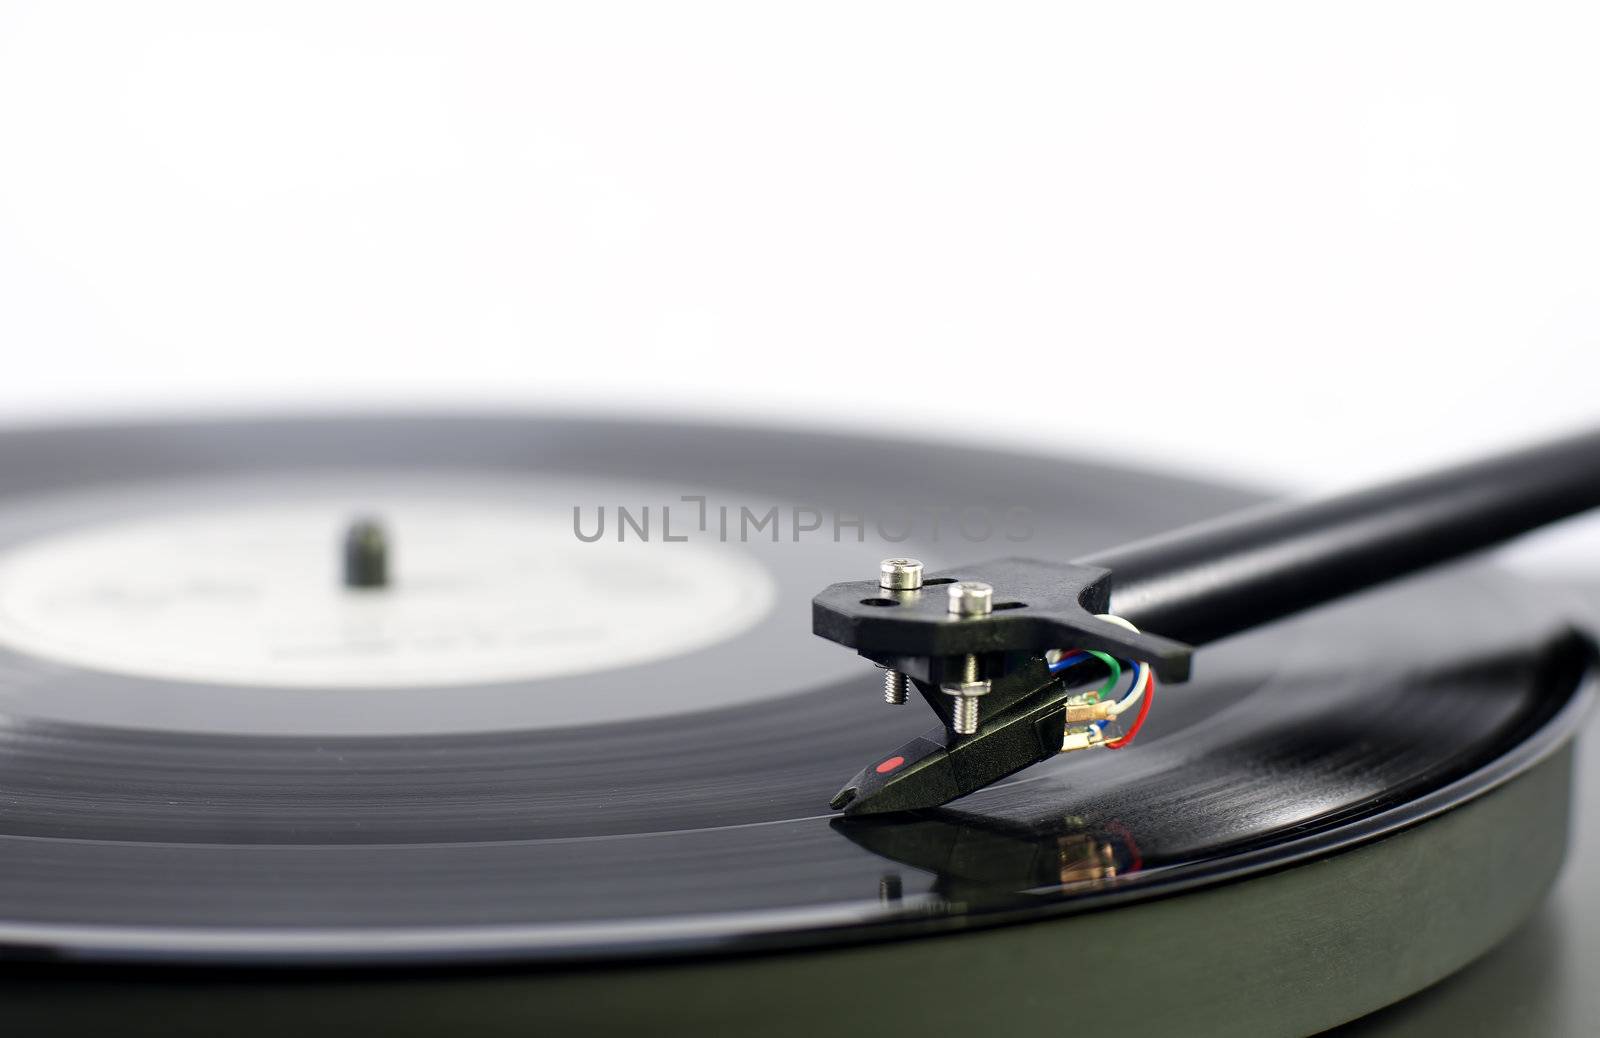 turntable by gufoto